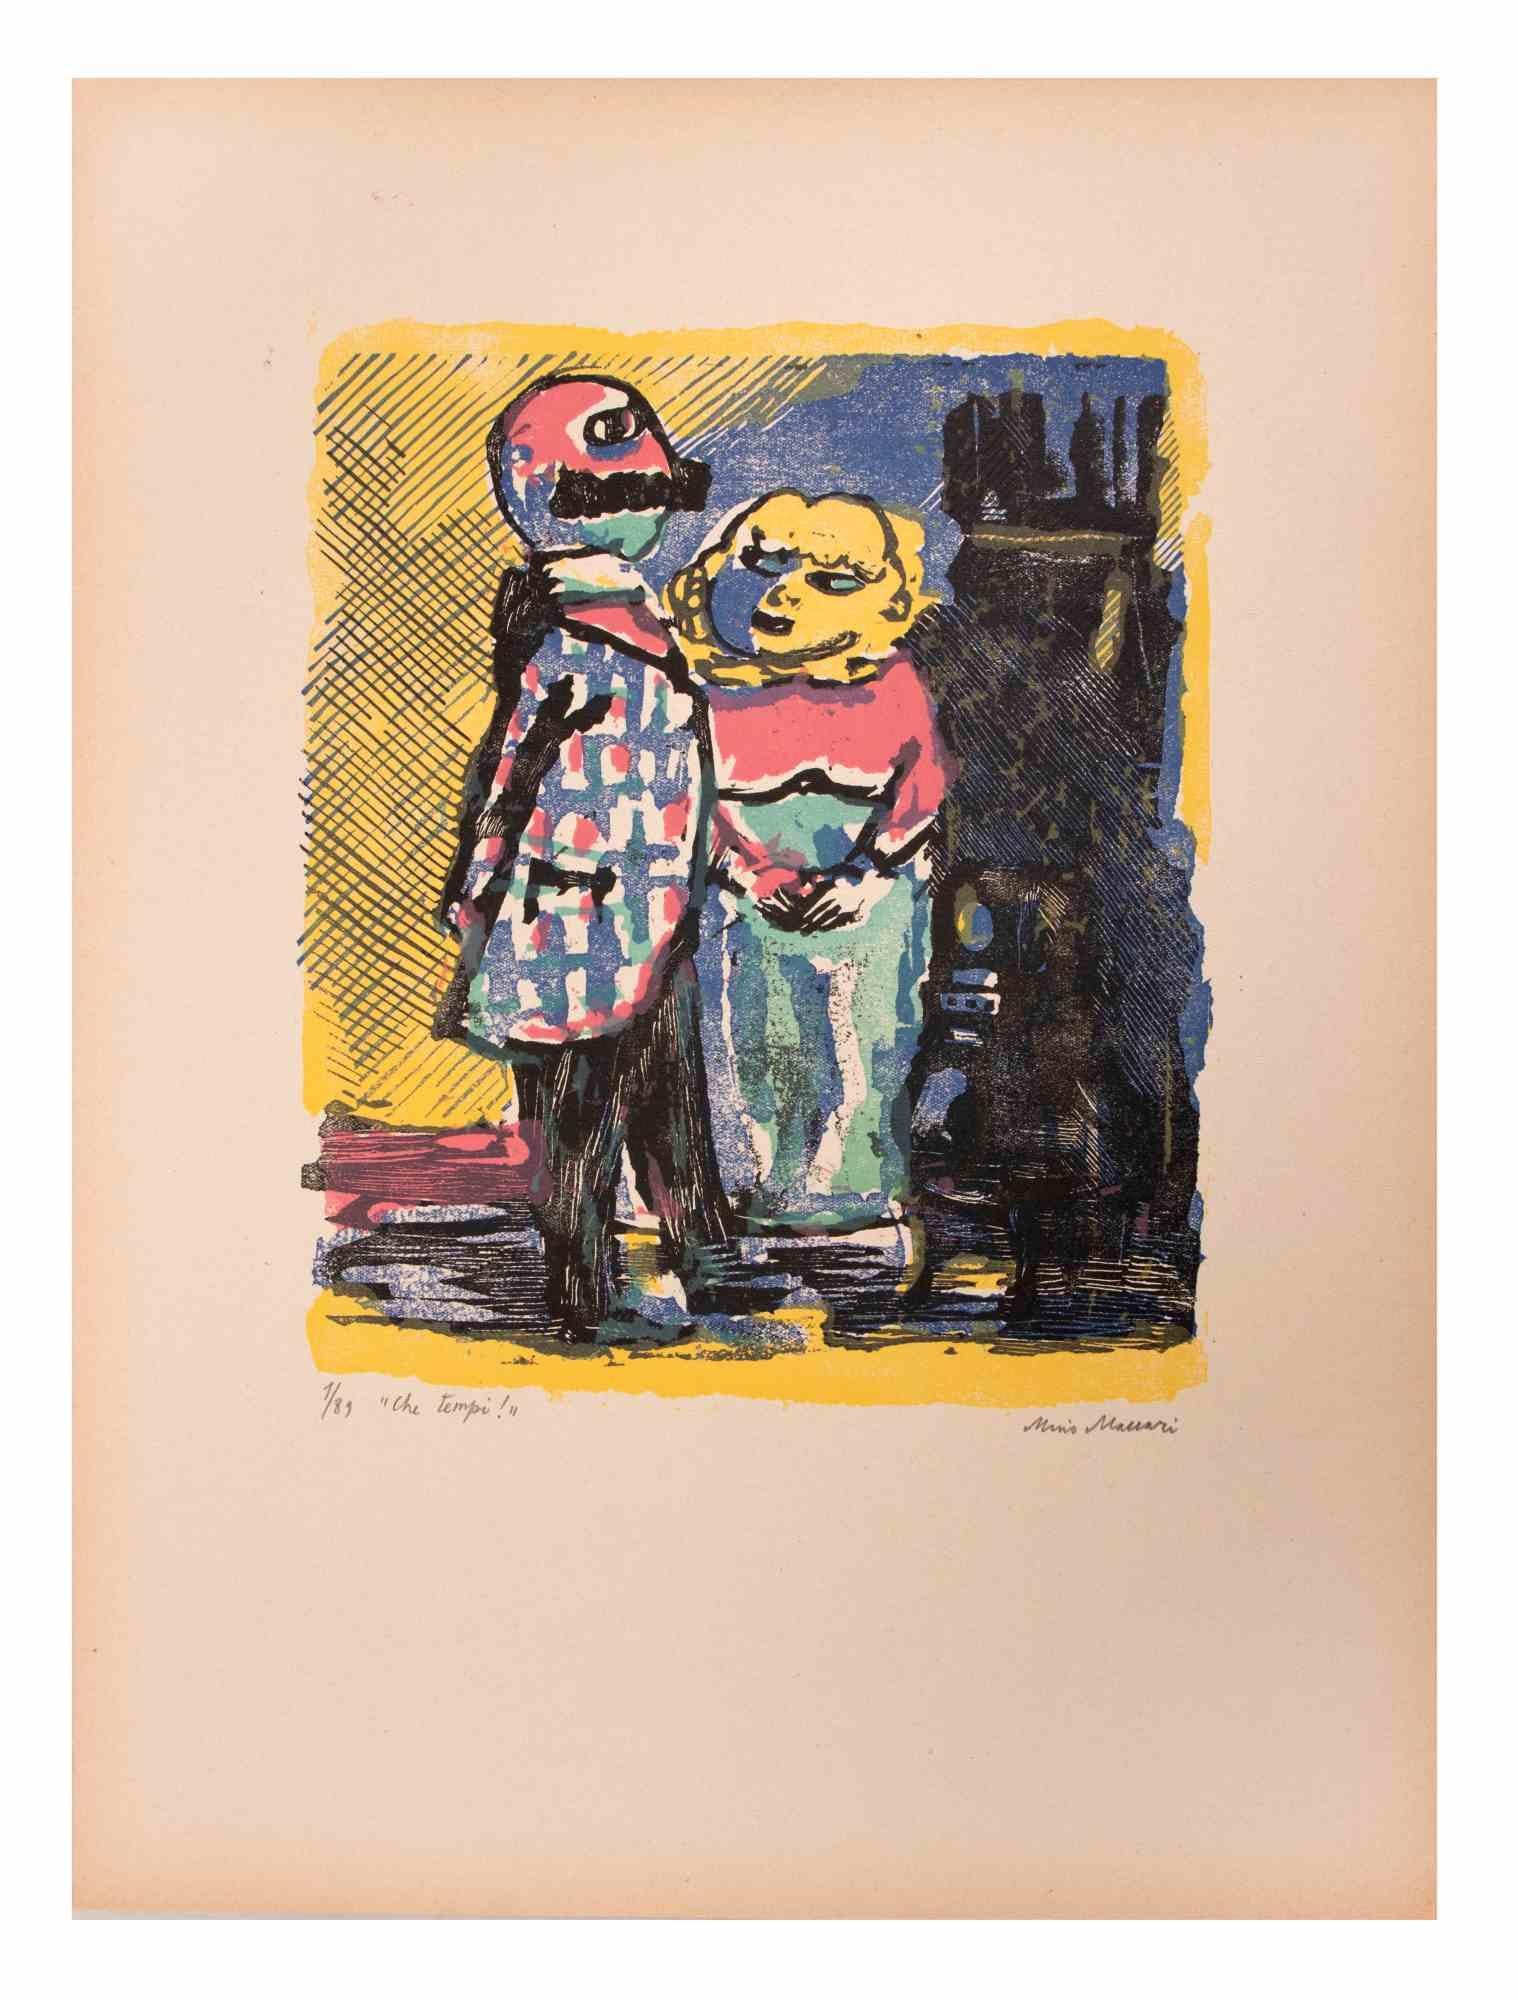 Those Were The Days! (Che tempi!) is an Artwork realized by Mino Maccari  (1924-1989) in the Mid-20th Century.

Colored woodcut on paper. Hand-signed on the lower, numbered 1/89 specimens and titled on the left margin.

Good conditions.

Mino